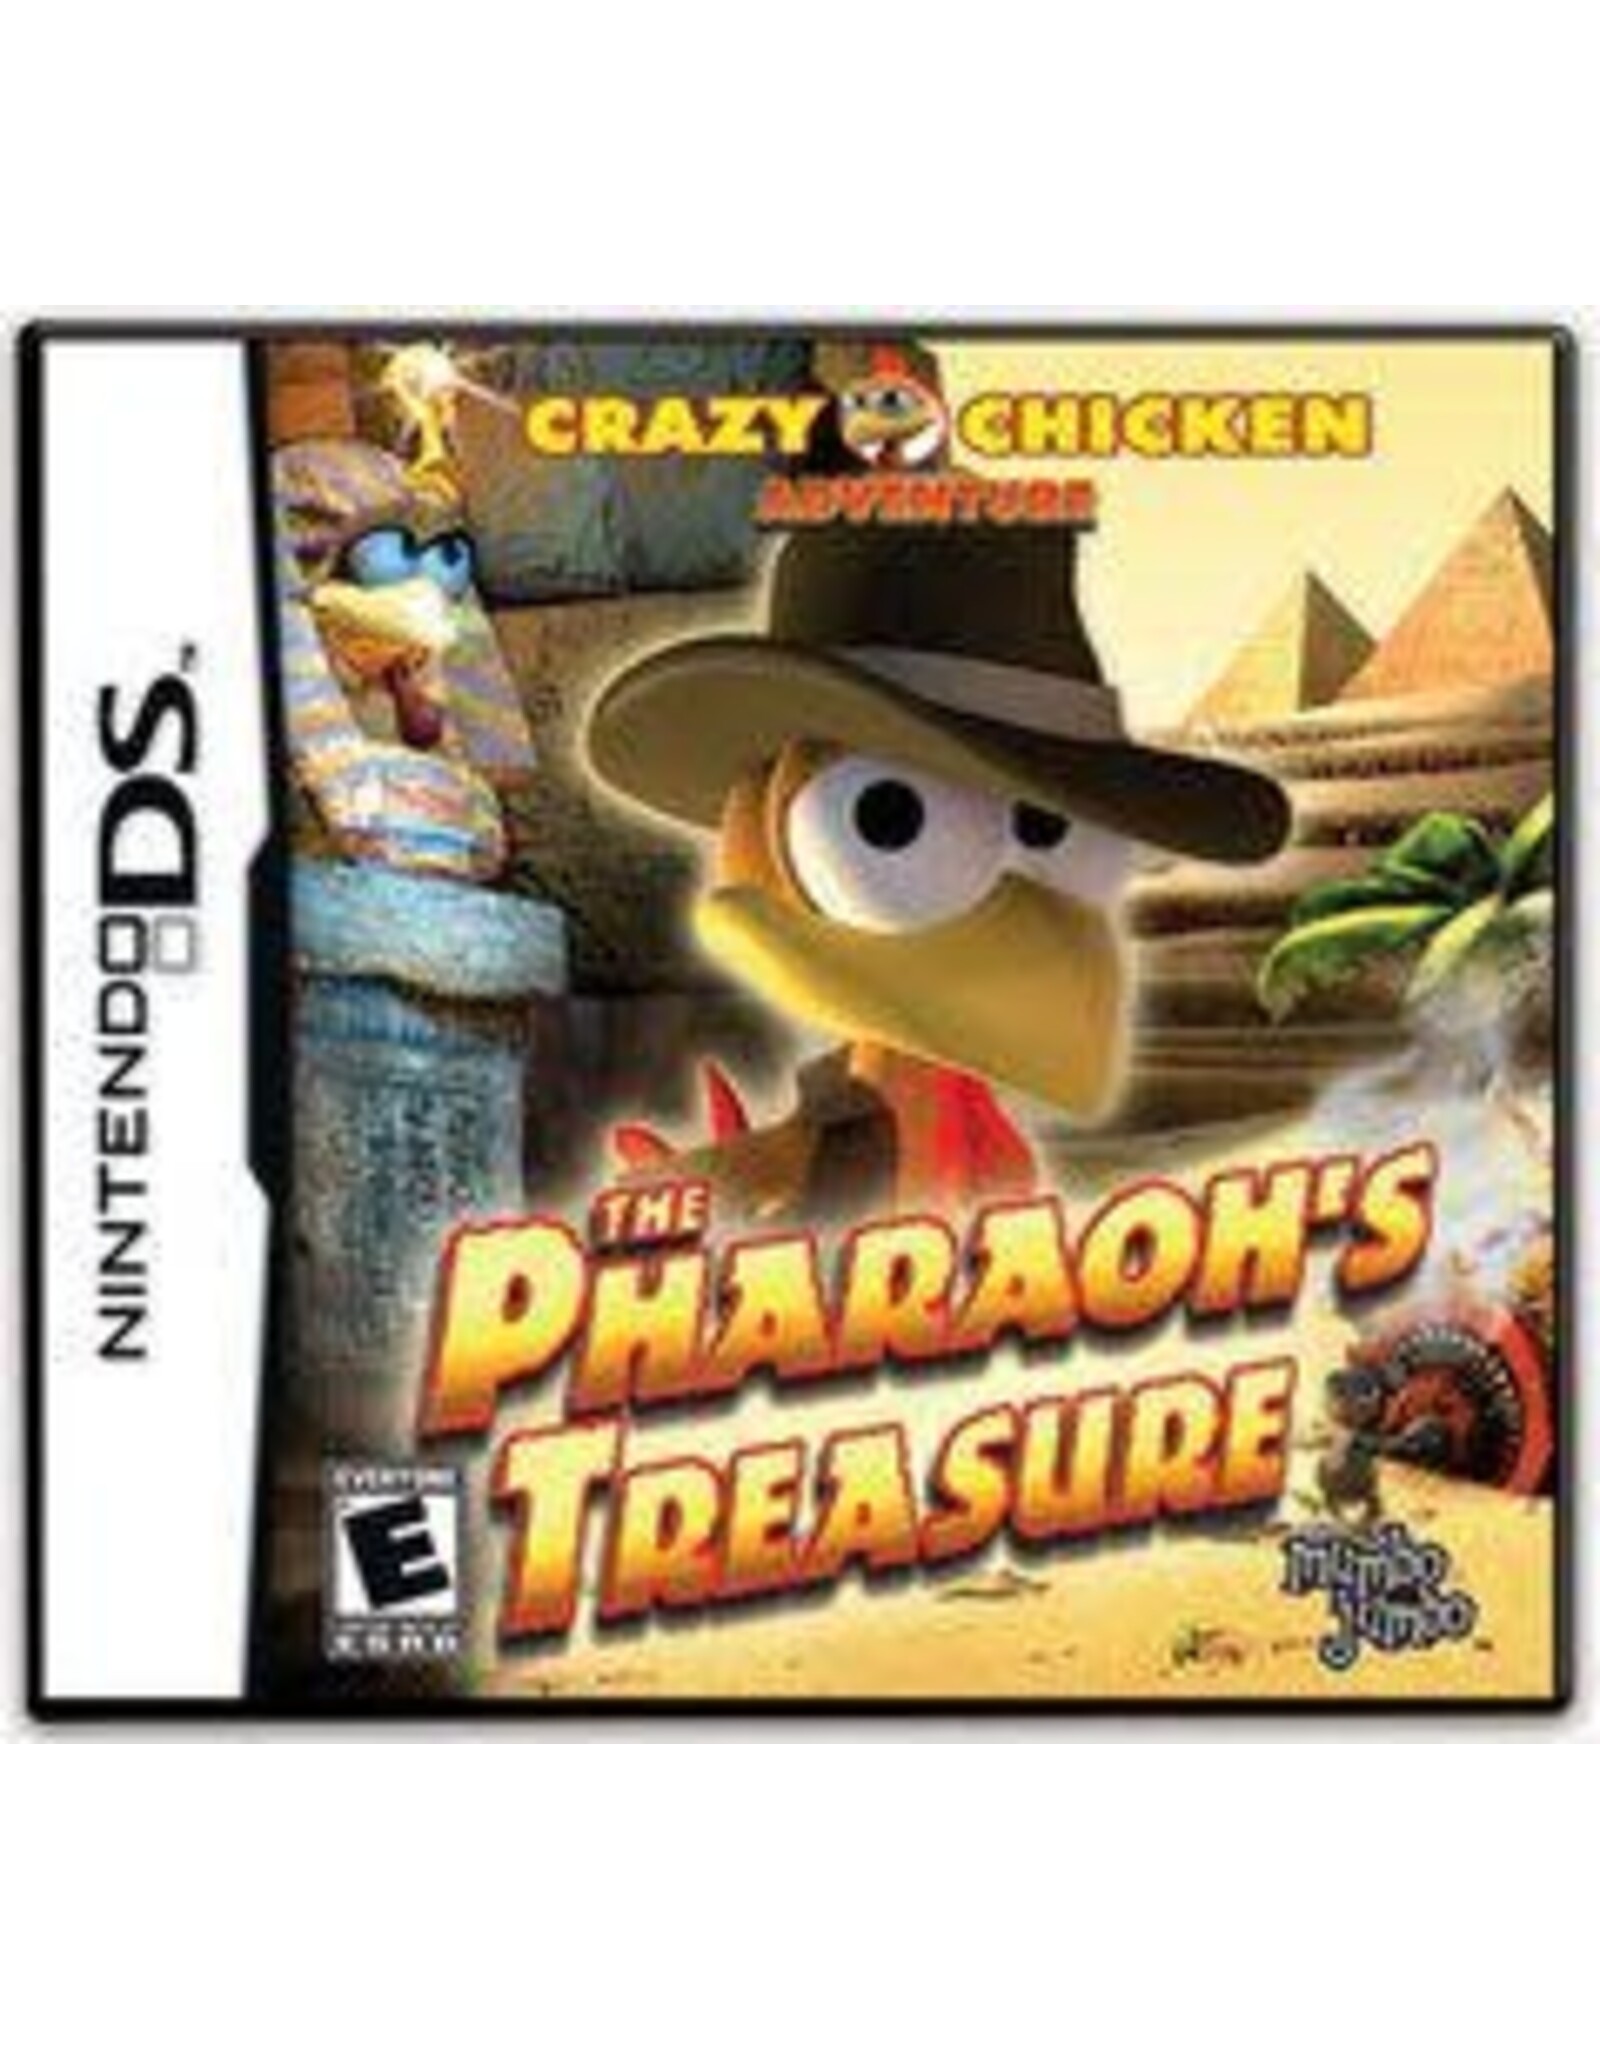 Nintendo DS Crazy Chicken: The Pharaoh's Treasure (Cart Only)